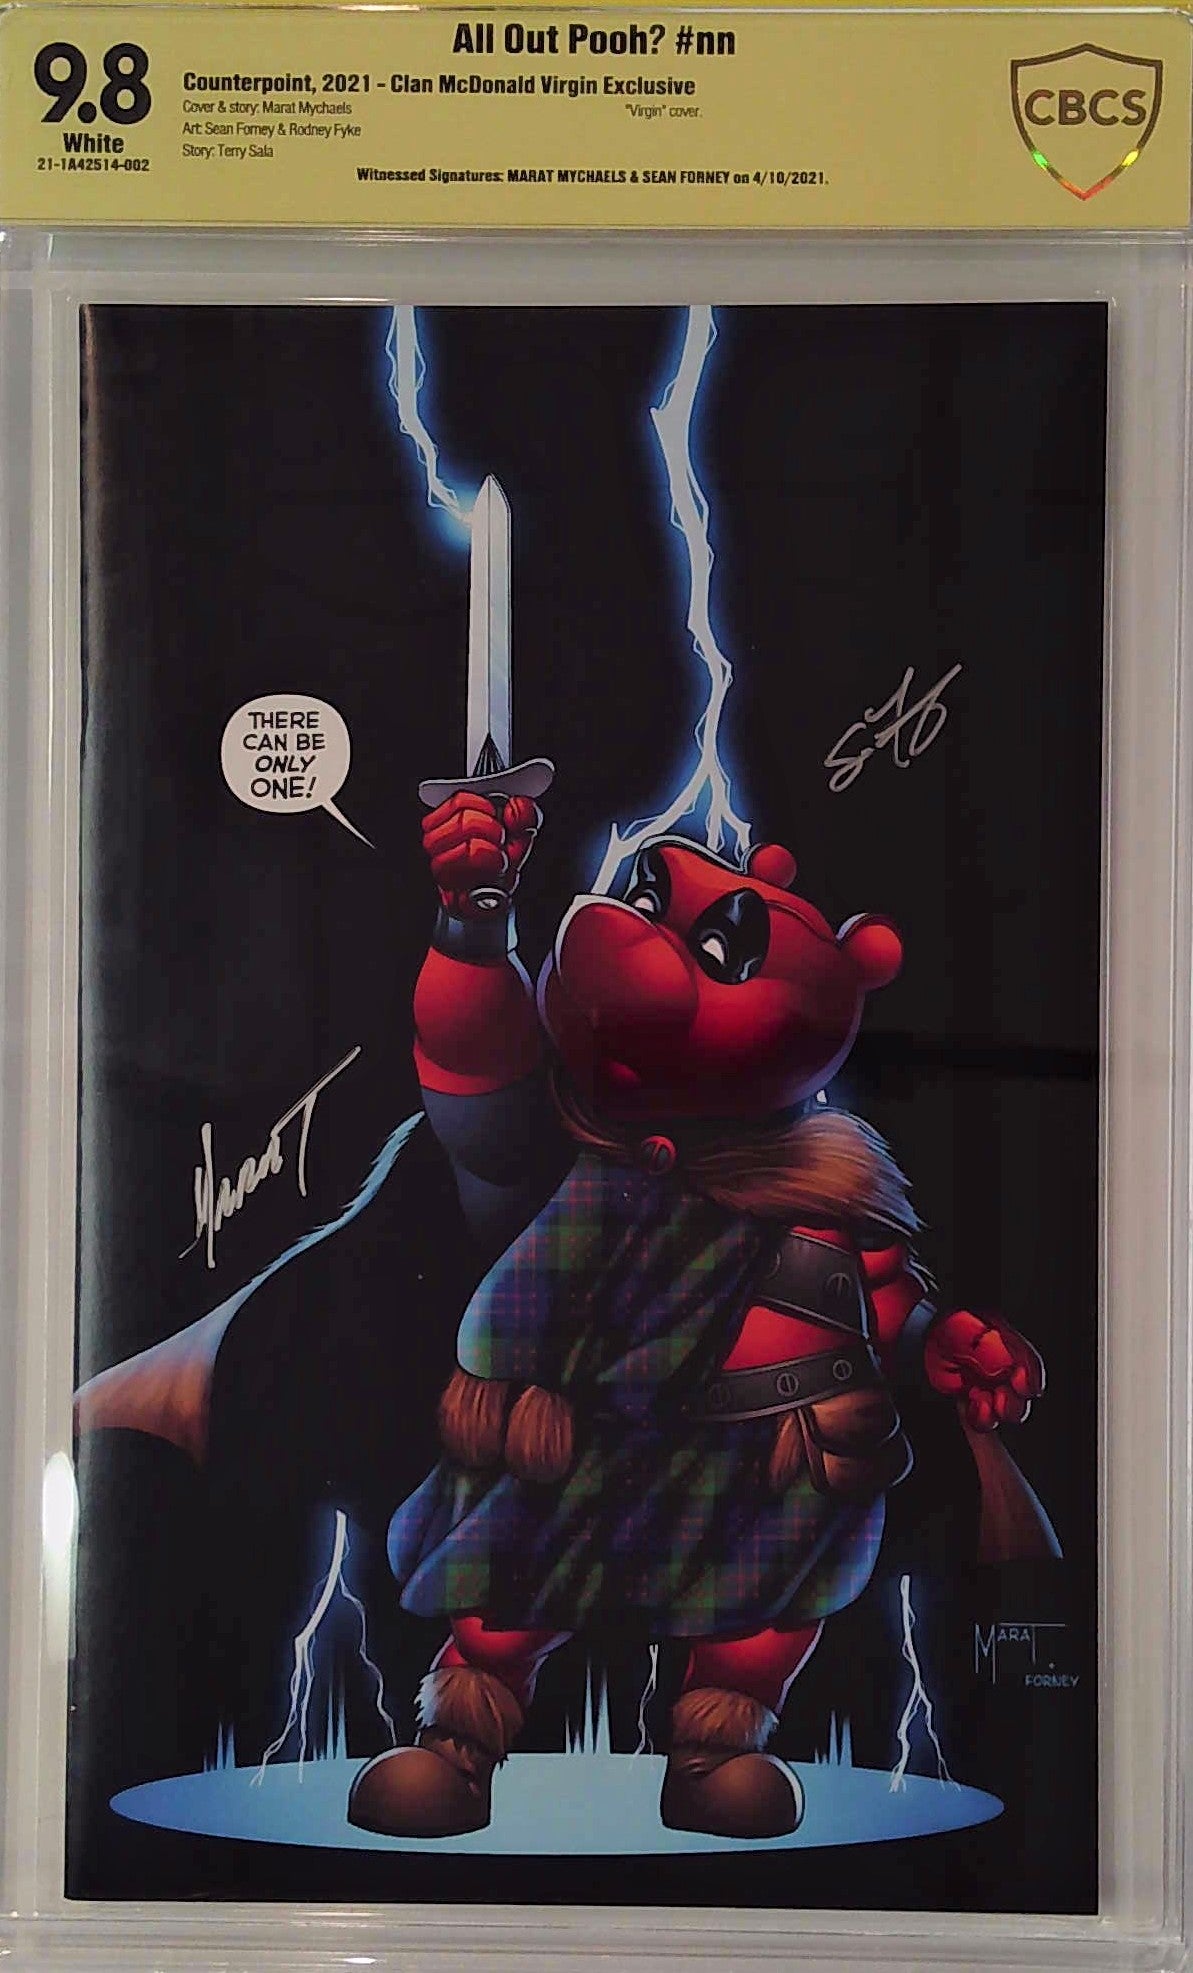 All Out Pooh #nn Clan McDonald Virgin Exclusive CBCS 9.8 Yellow Label Marat Mychaels & Sean Forney Signature